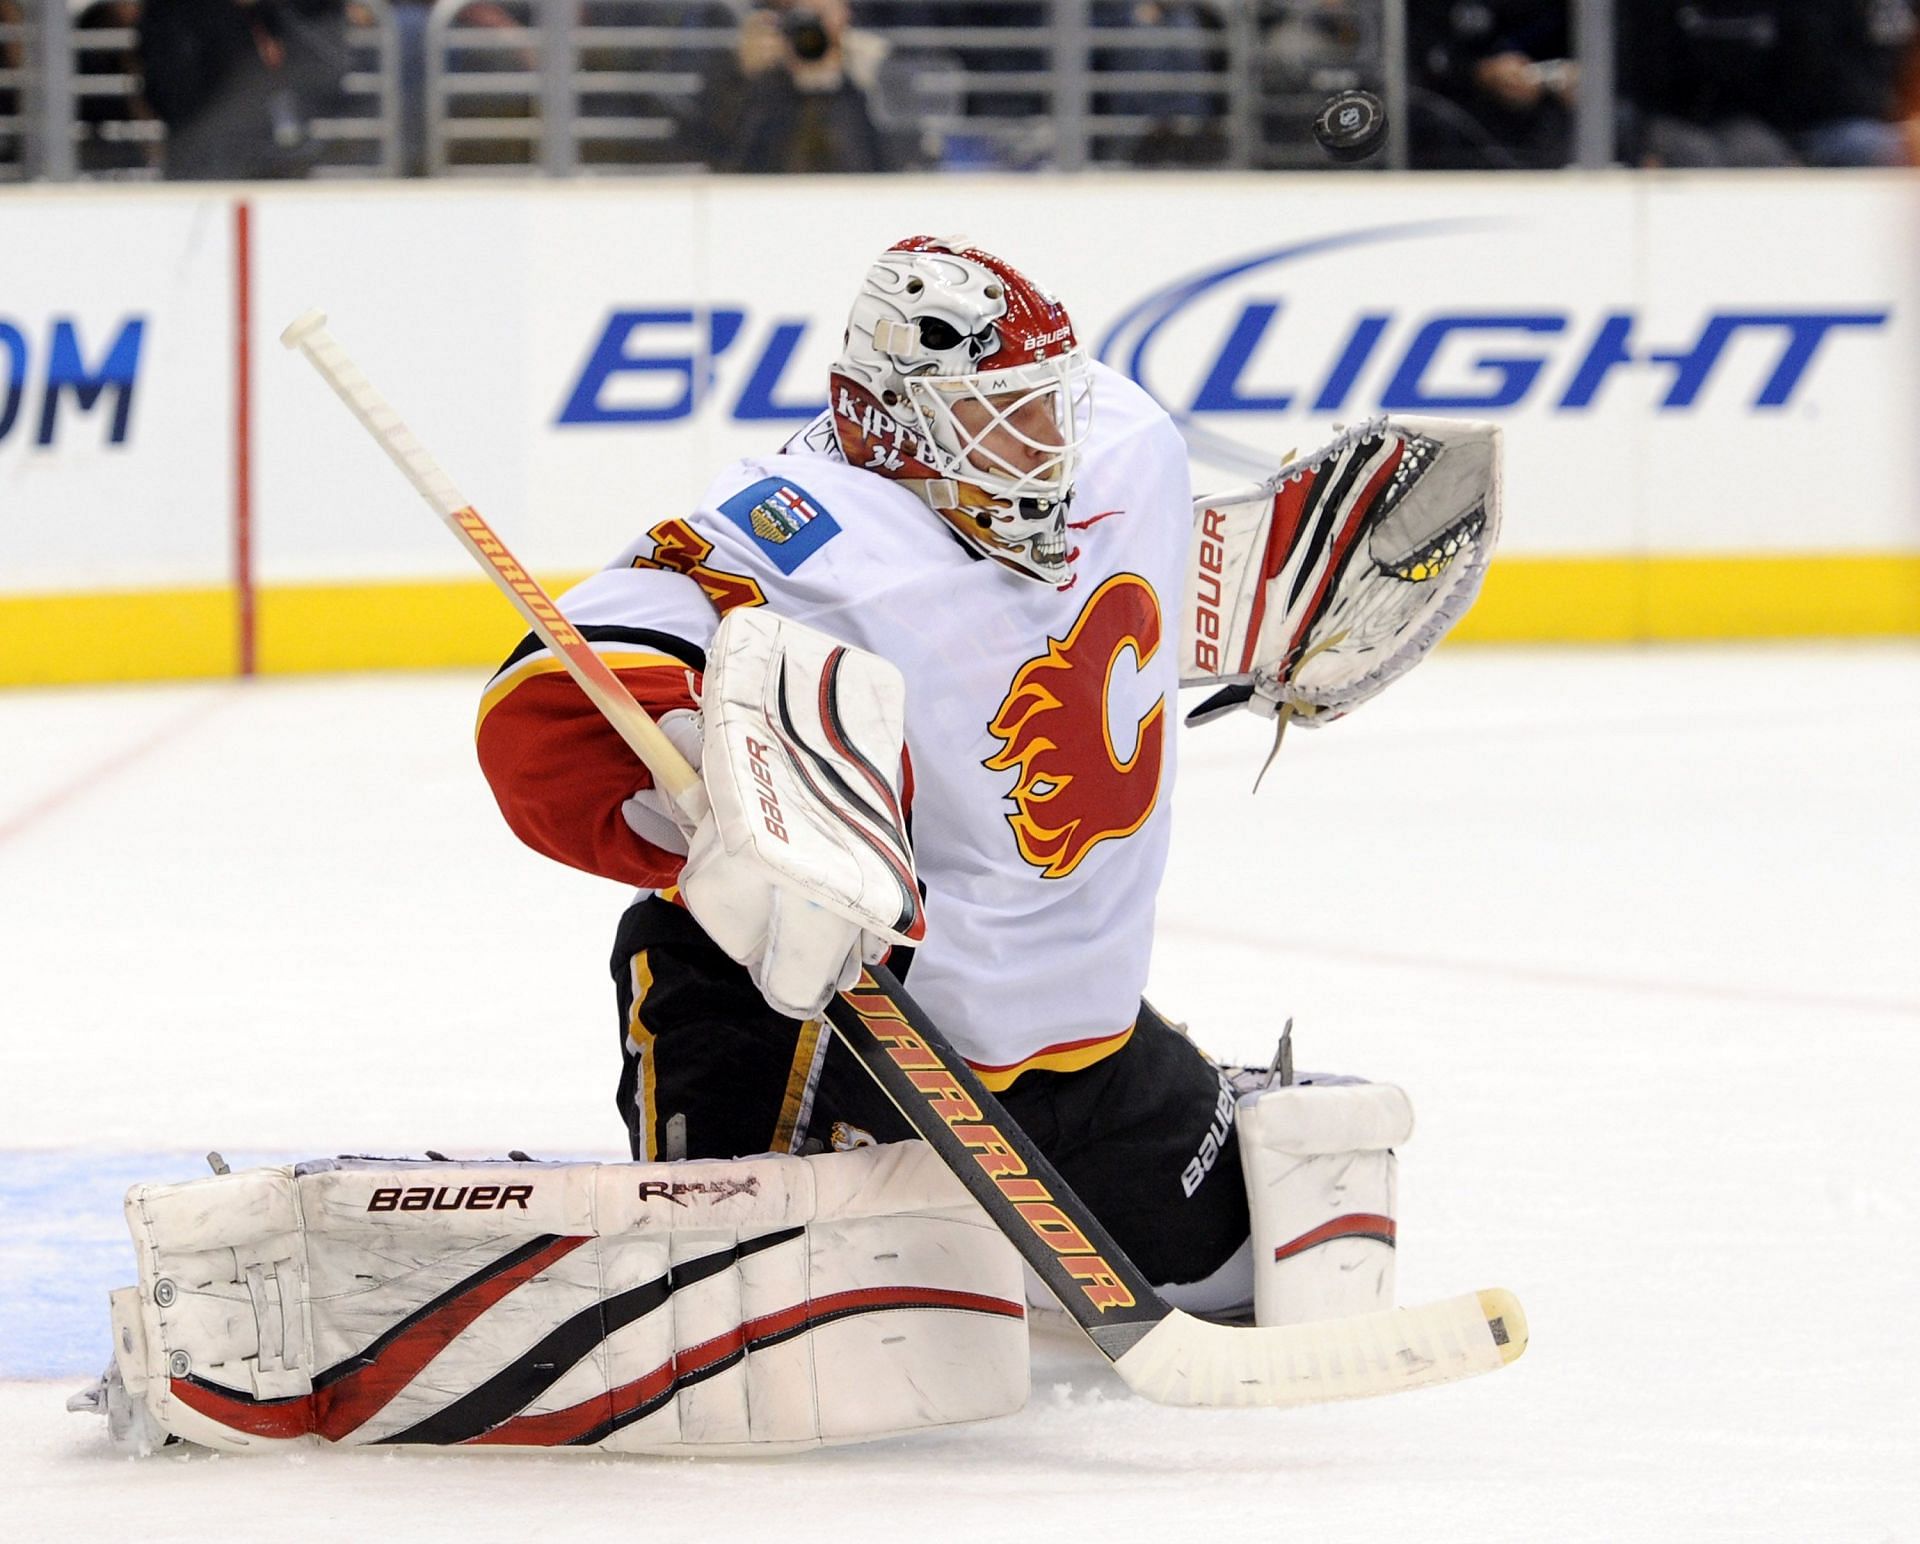 Mika Kiprusoff's number 34 will be retired by the Calgary Flames next